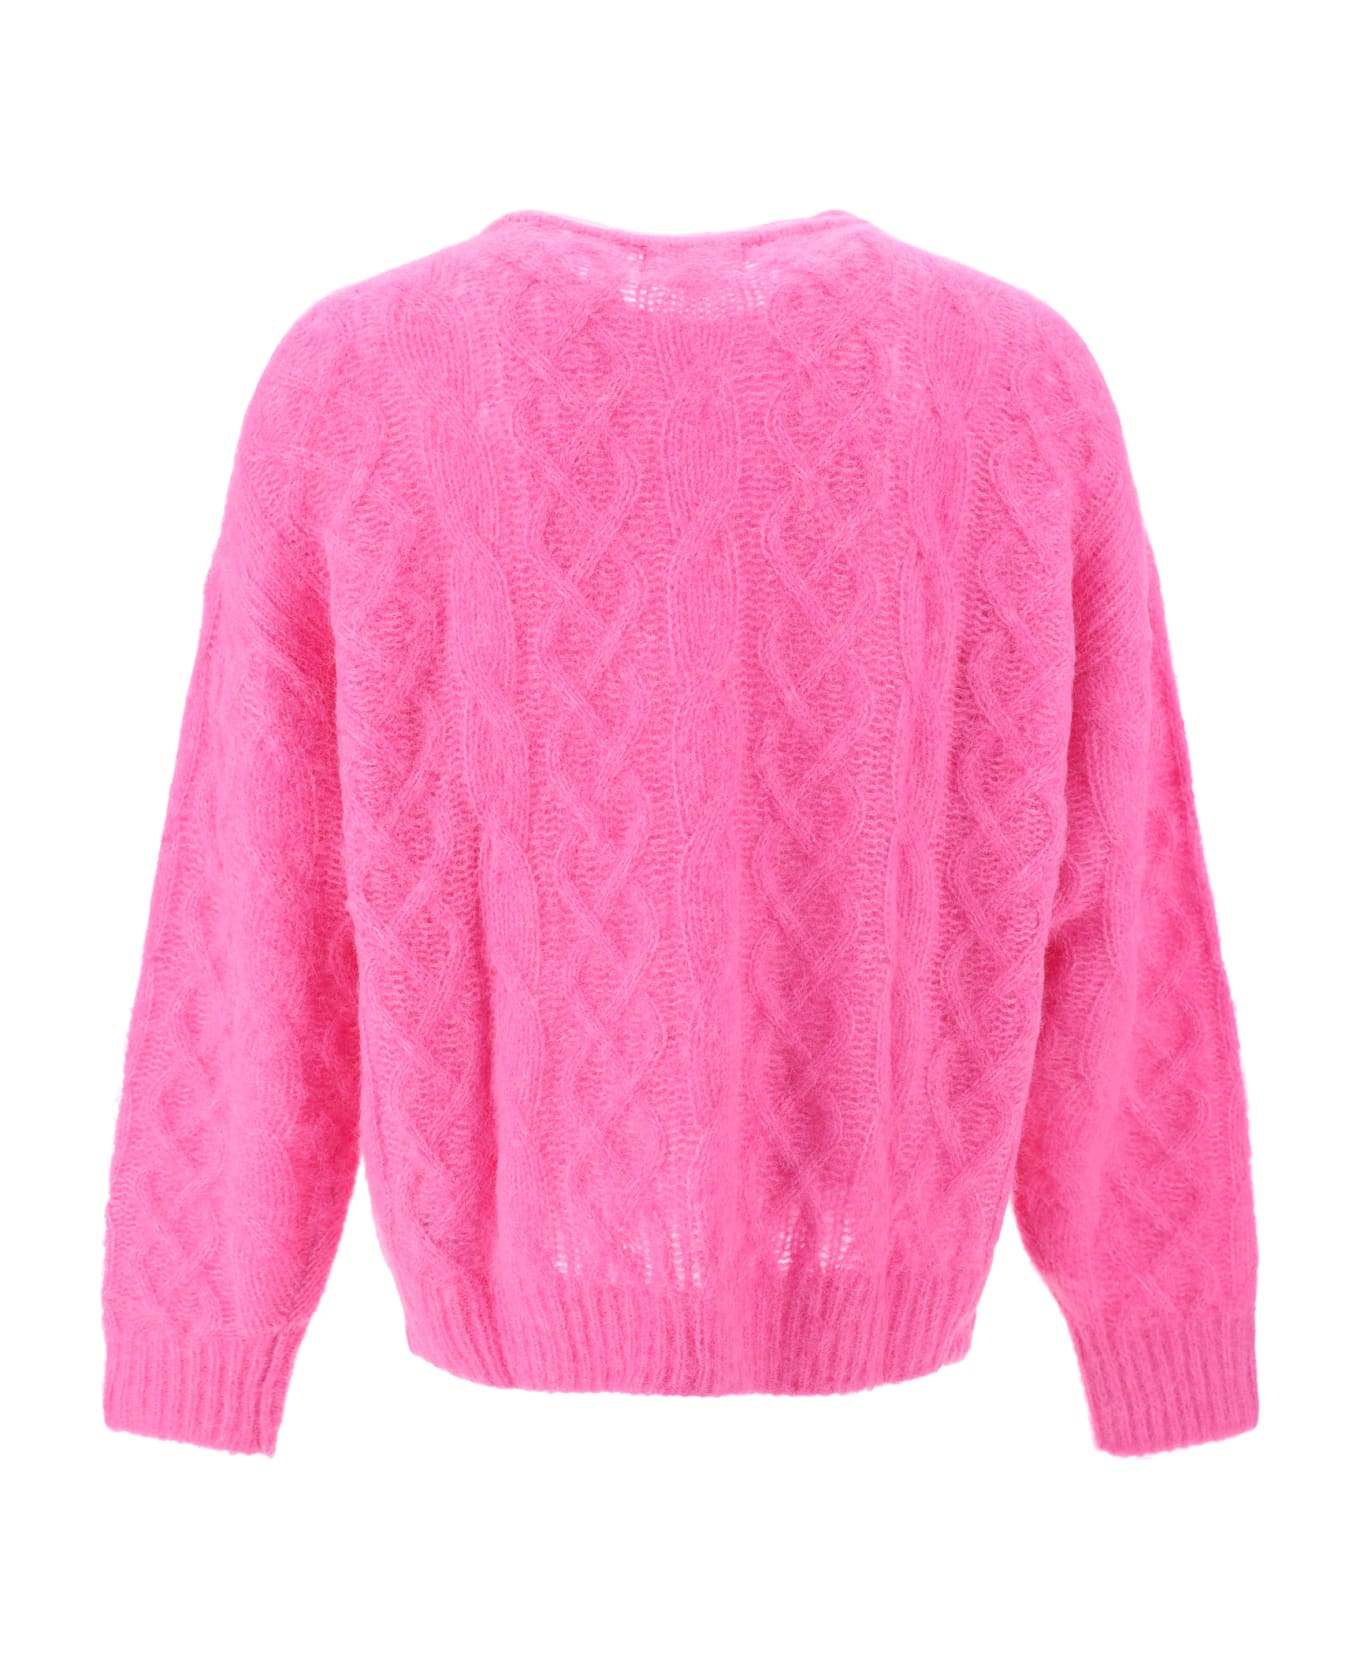 Isabel Marant Anson Sweater - Fluo Pink